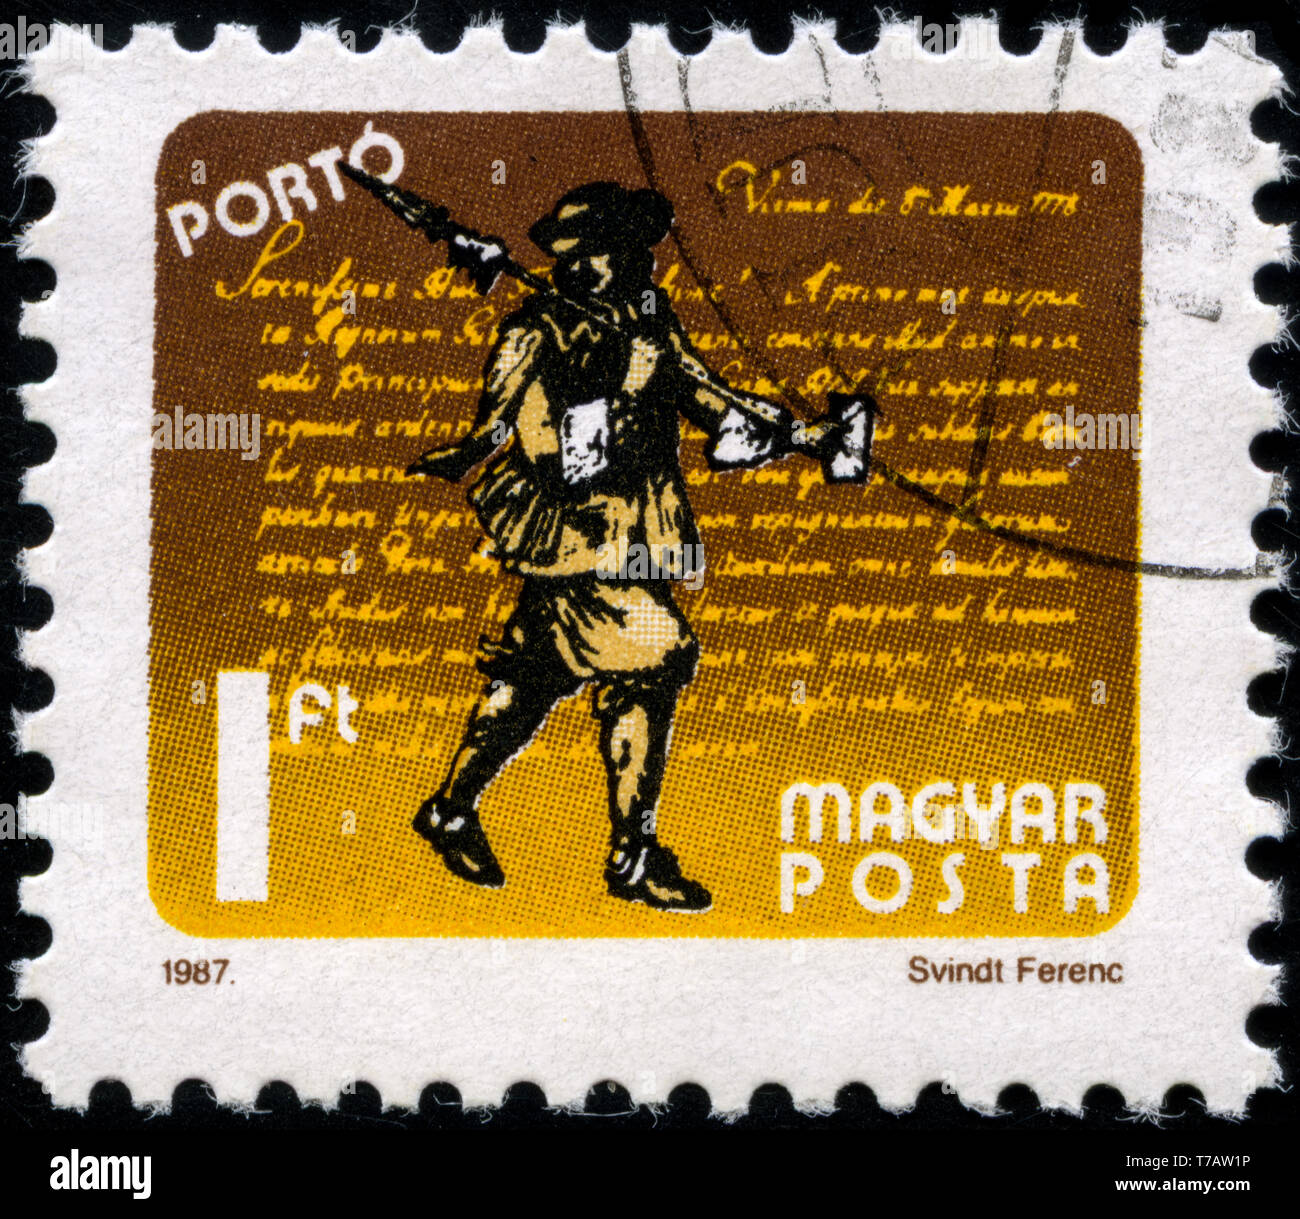 Postage stamp from Hungary in the Postage Due series issued in 1987 Stock Photo